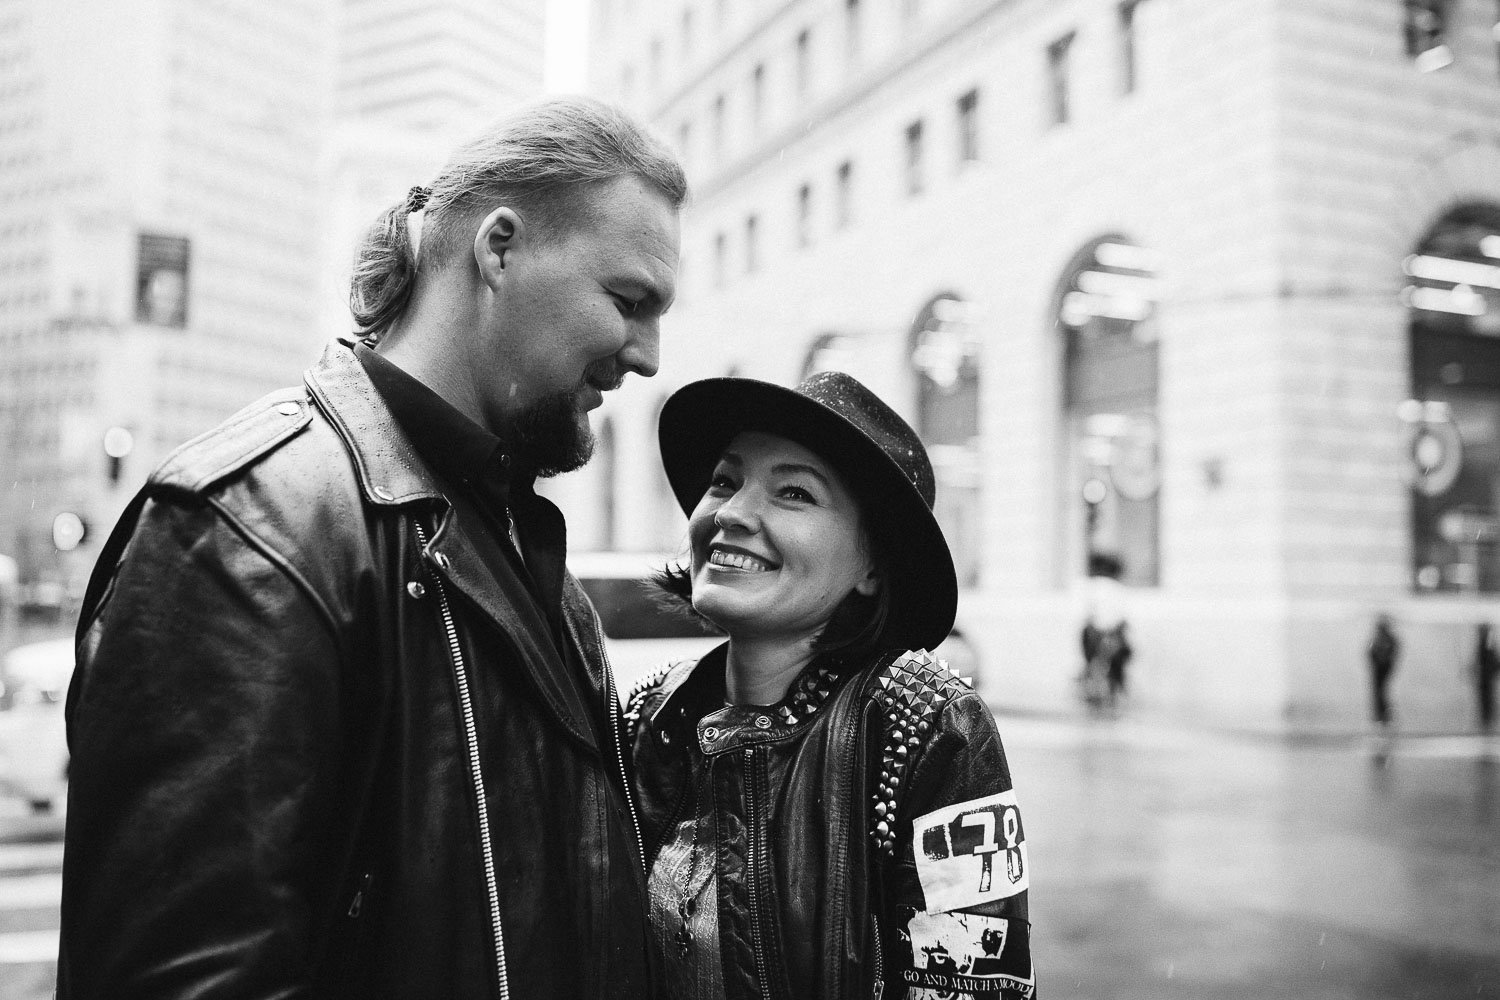 Rock'n'Roll elopement in San Francisco Downtown in rainy weather. Hard Rock bikers wedding. Leather jackets and biker boots.